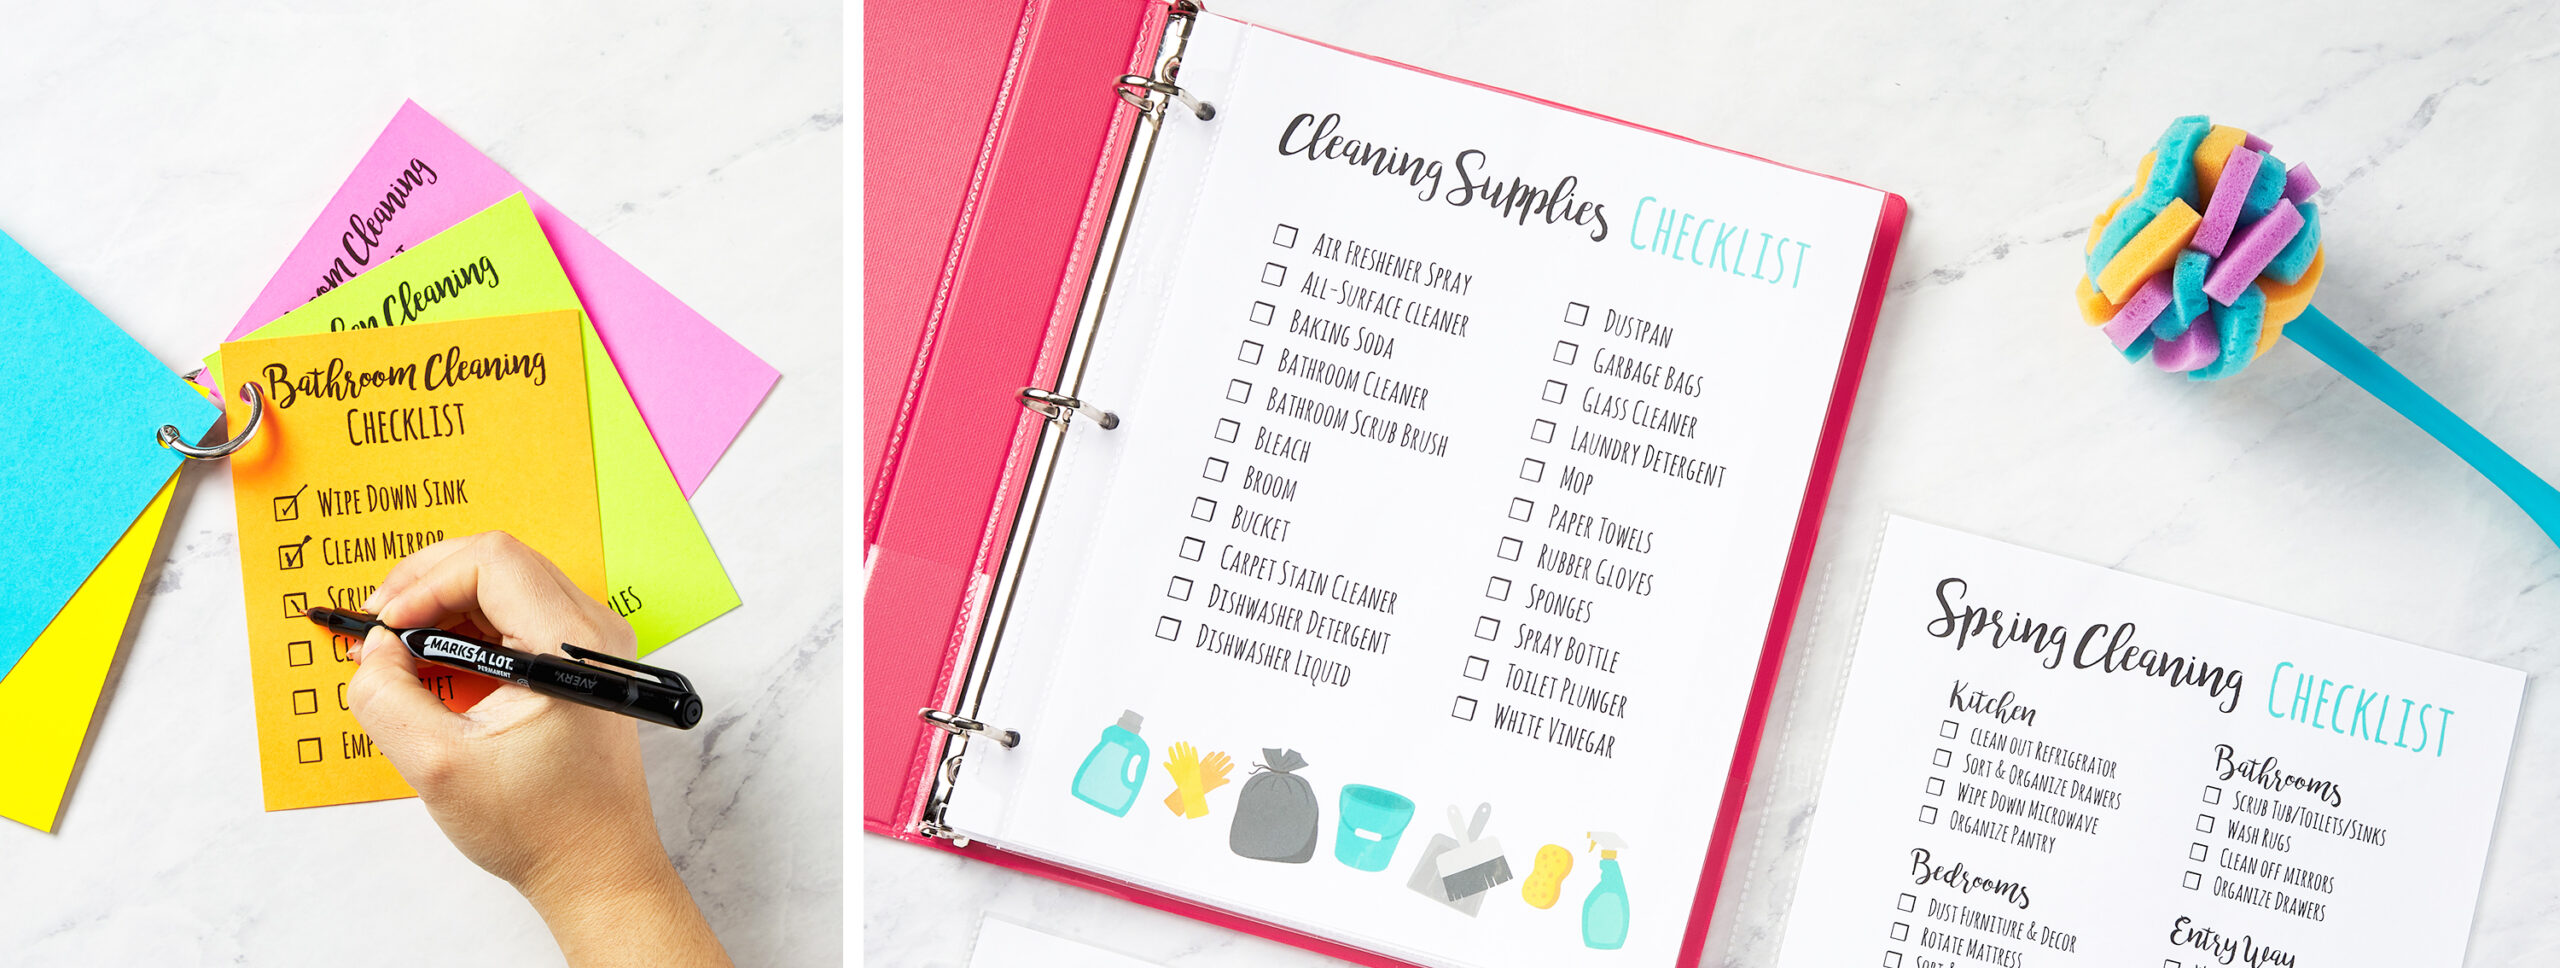 Essential Cleaning Hacks for Busy Moms - Effective Tips